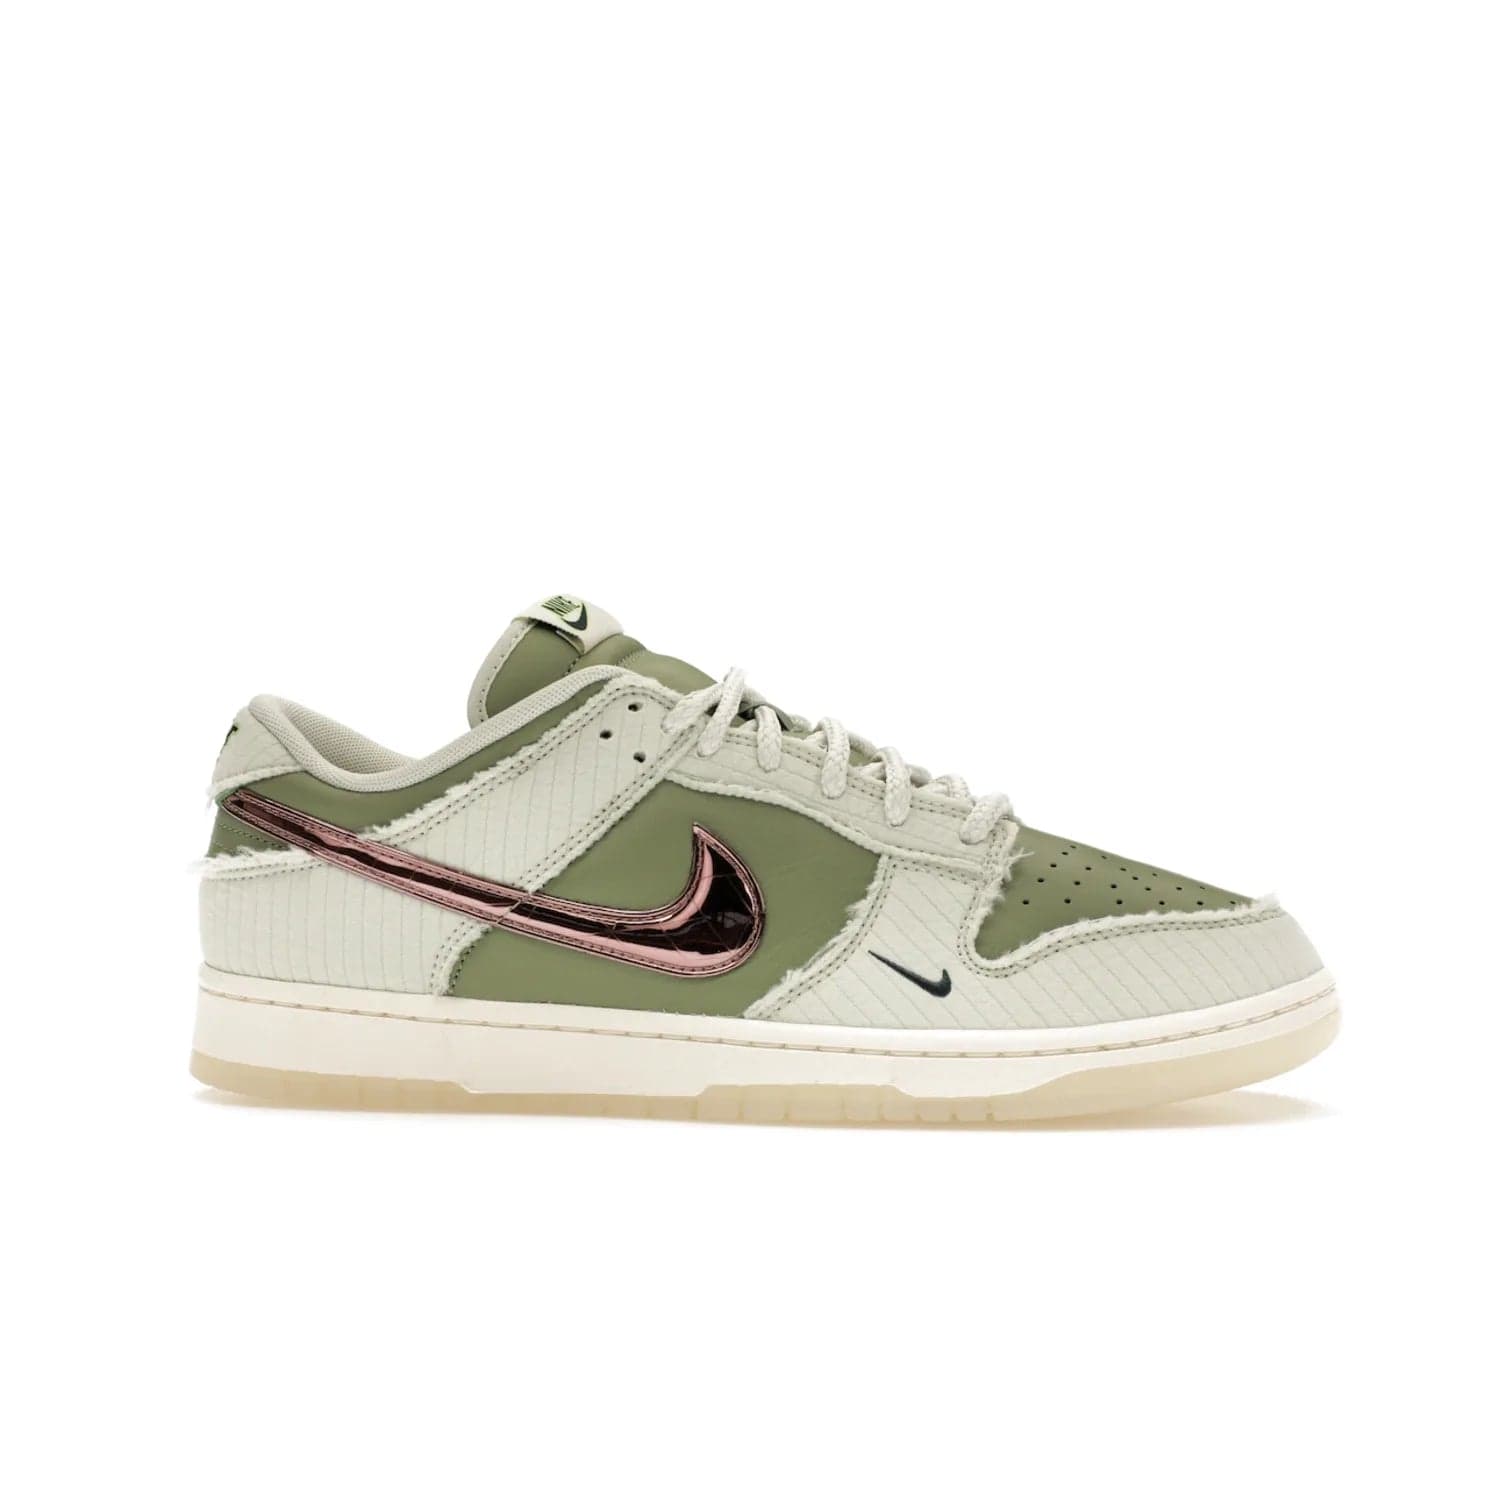 Nike Dunk Low Retro PRM Kyler Murray Be 1 of One - Image 2 - Only at www.BallersClubKickz.com - Introducing the Nike Dunk Low Retro PRM Kyler Murray "Be 1 of One"! A Sea Glass upper with Sail and Oil Green accents, finished with Rose Gold accents. Drop date: November 10th.